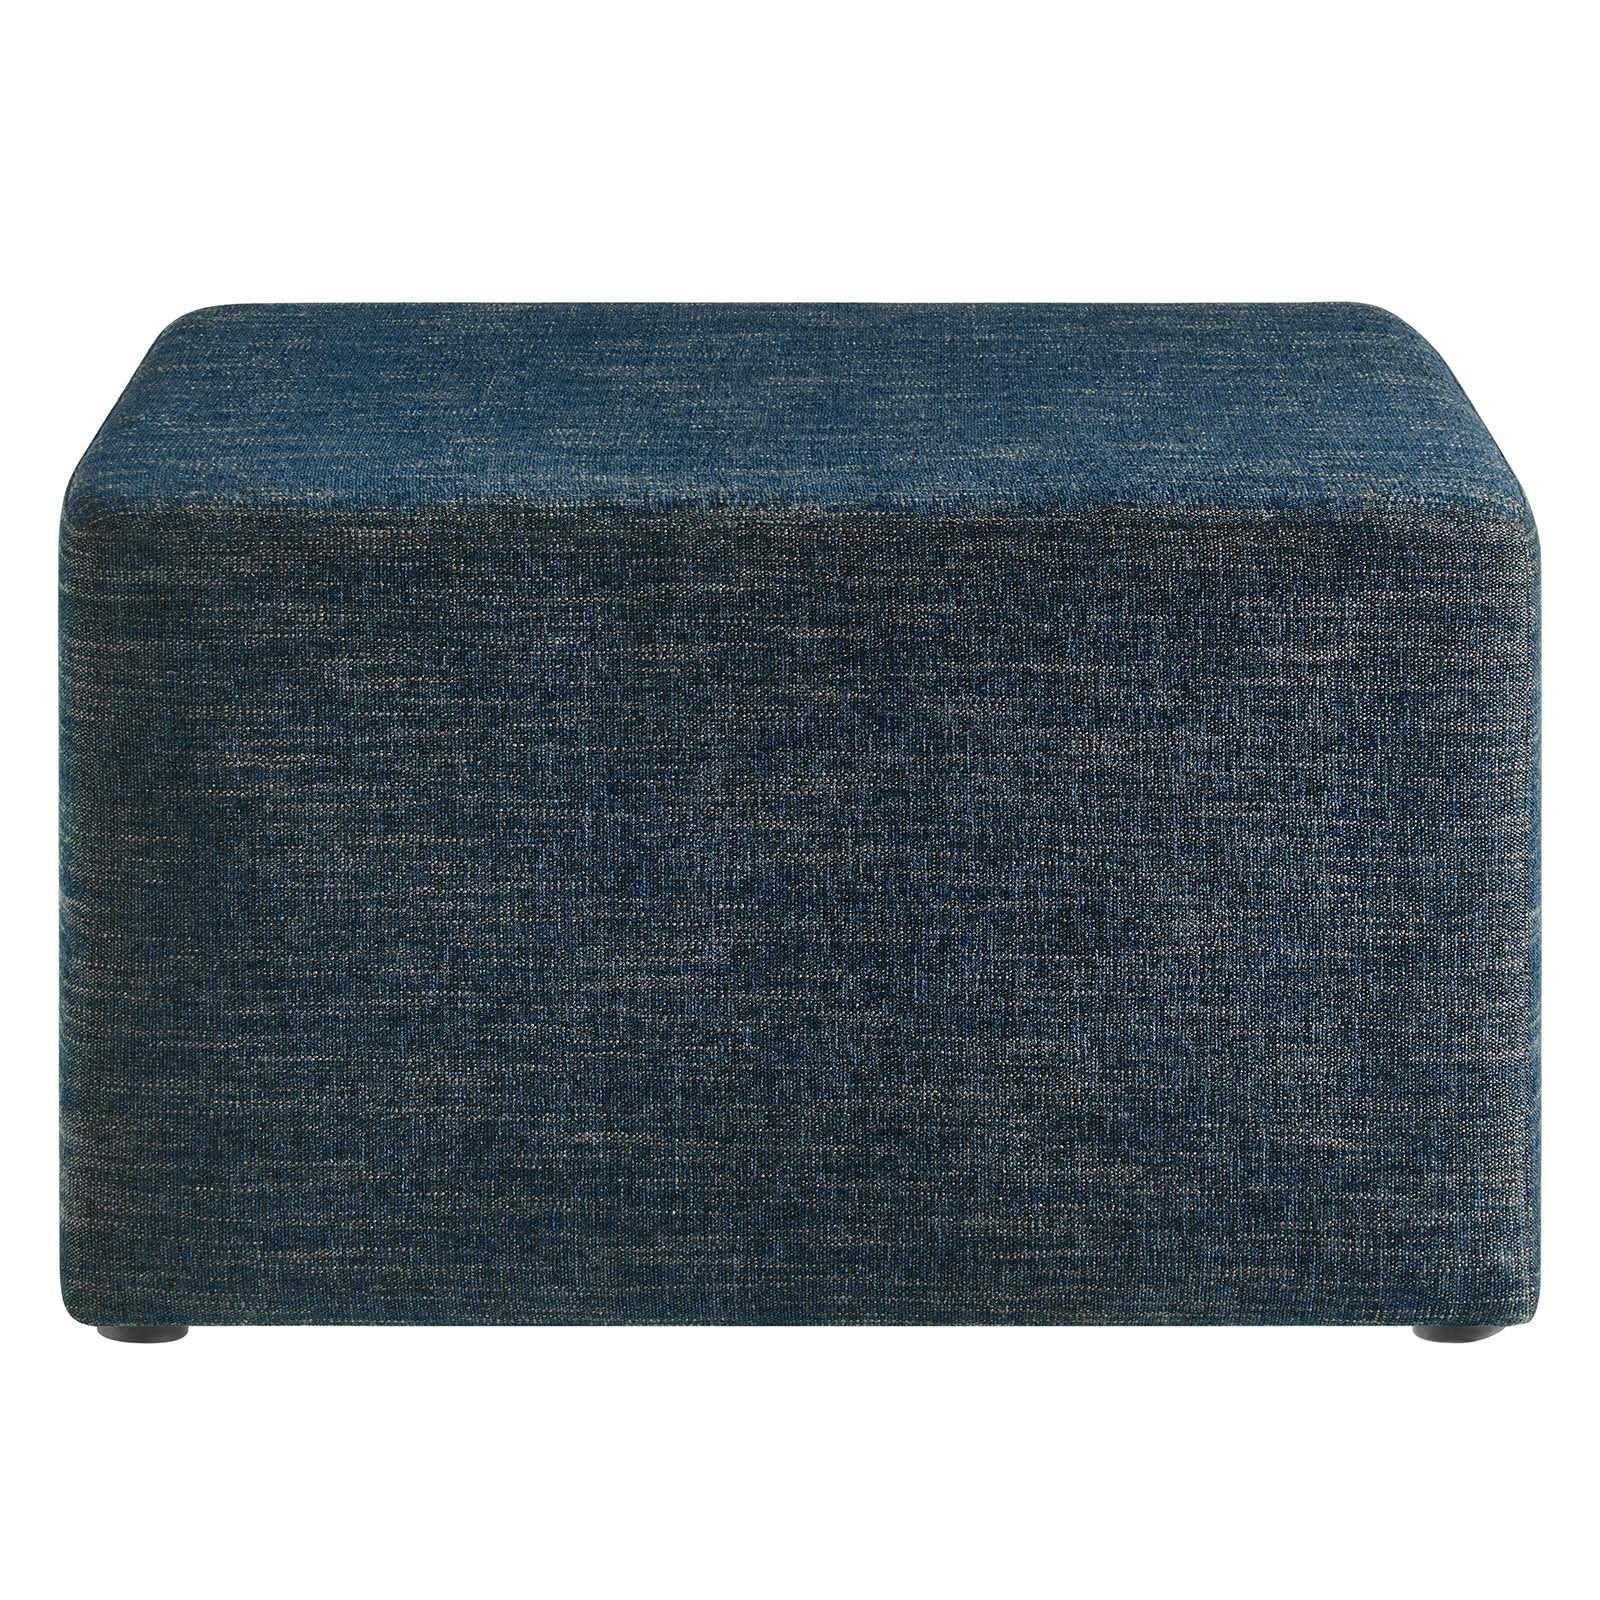 Callum Large 28" Square Woven Heathered Fabric Upholstered Ottoman - East Shore Modern Home Furnishings